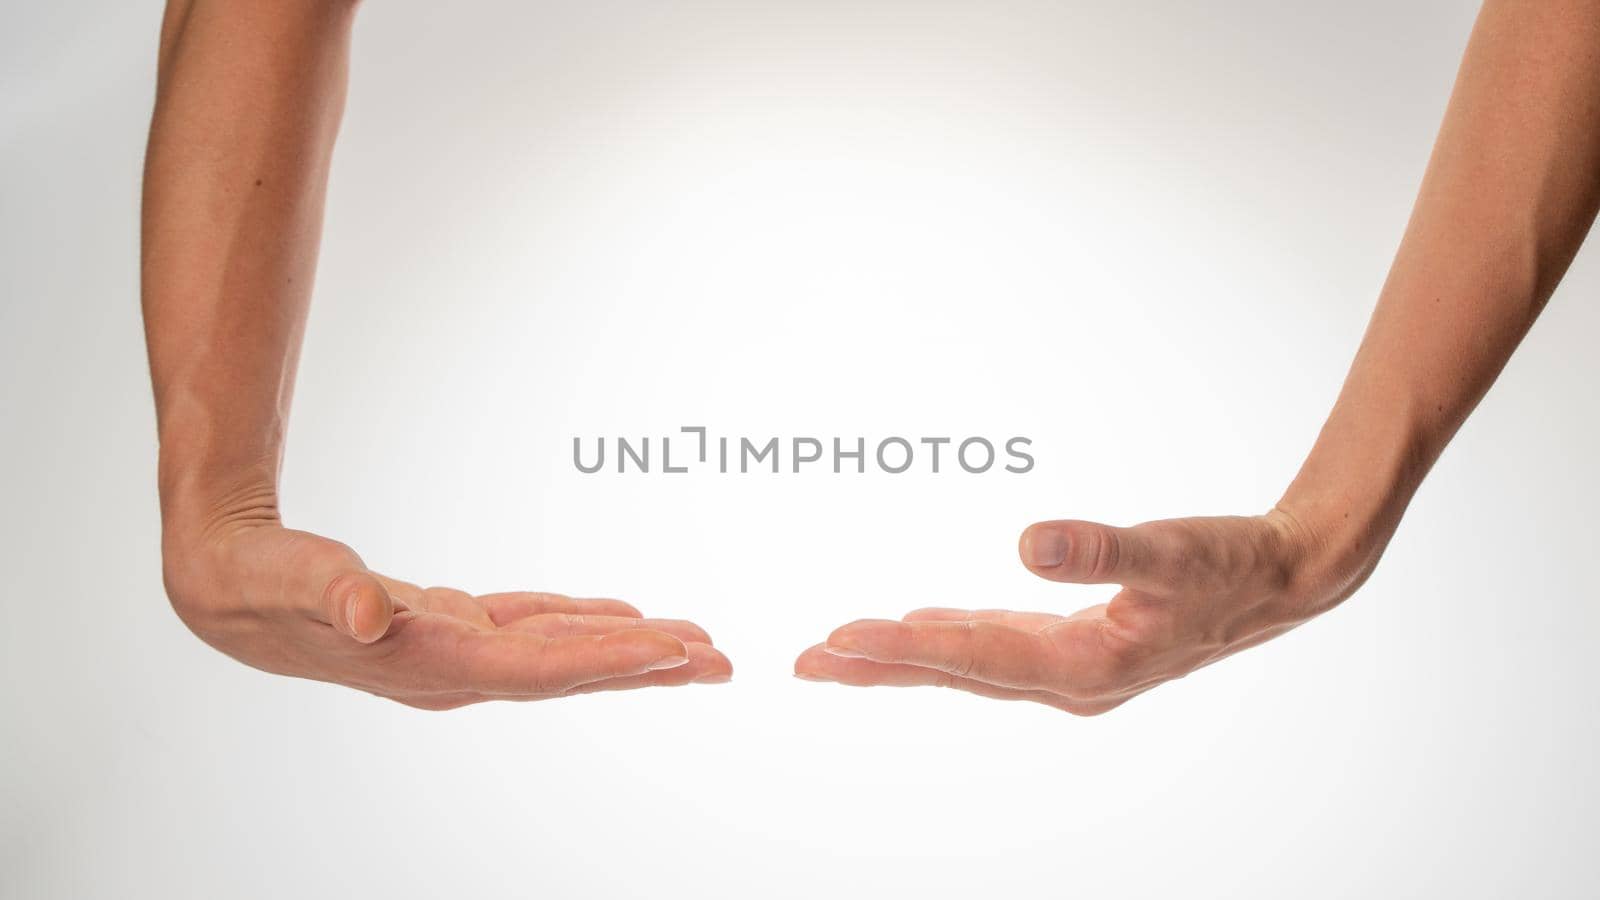 Women's hands insulated hold a large object on a white background by voktybre